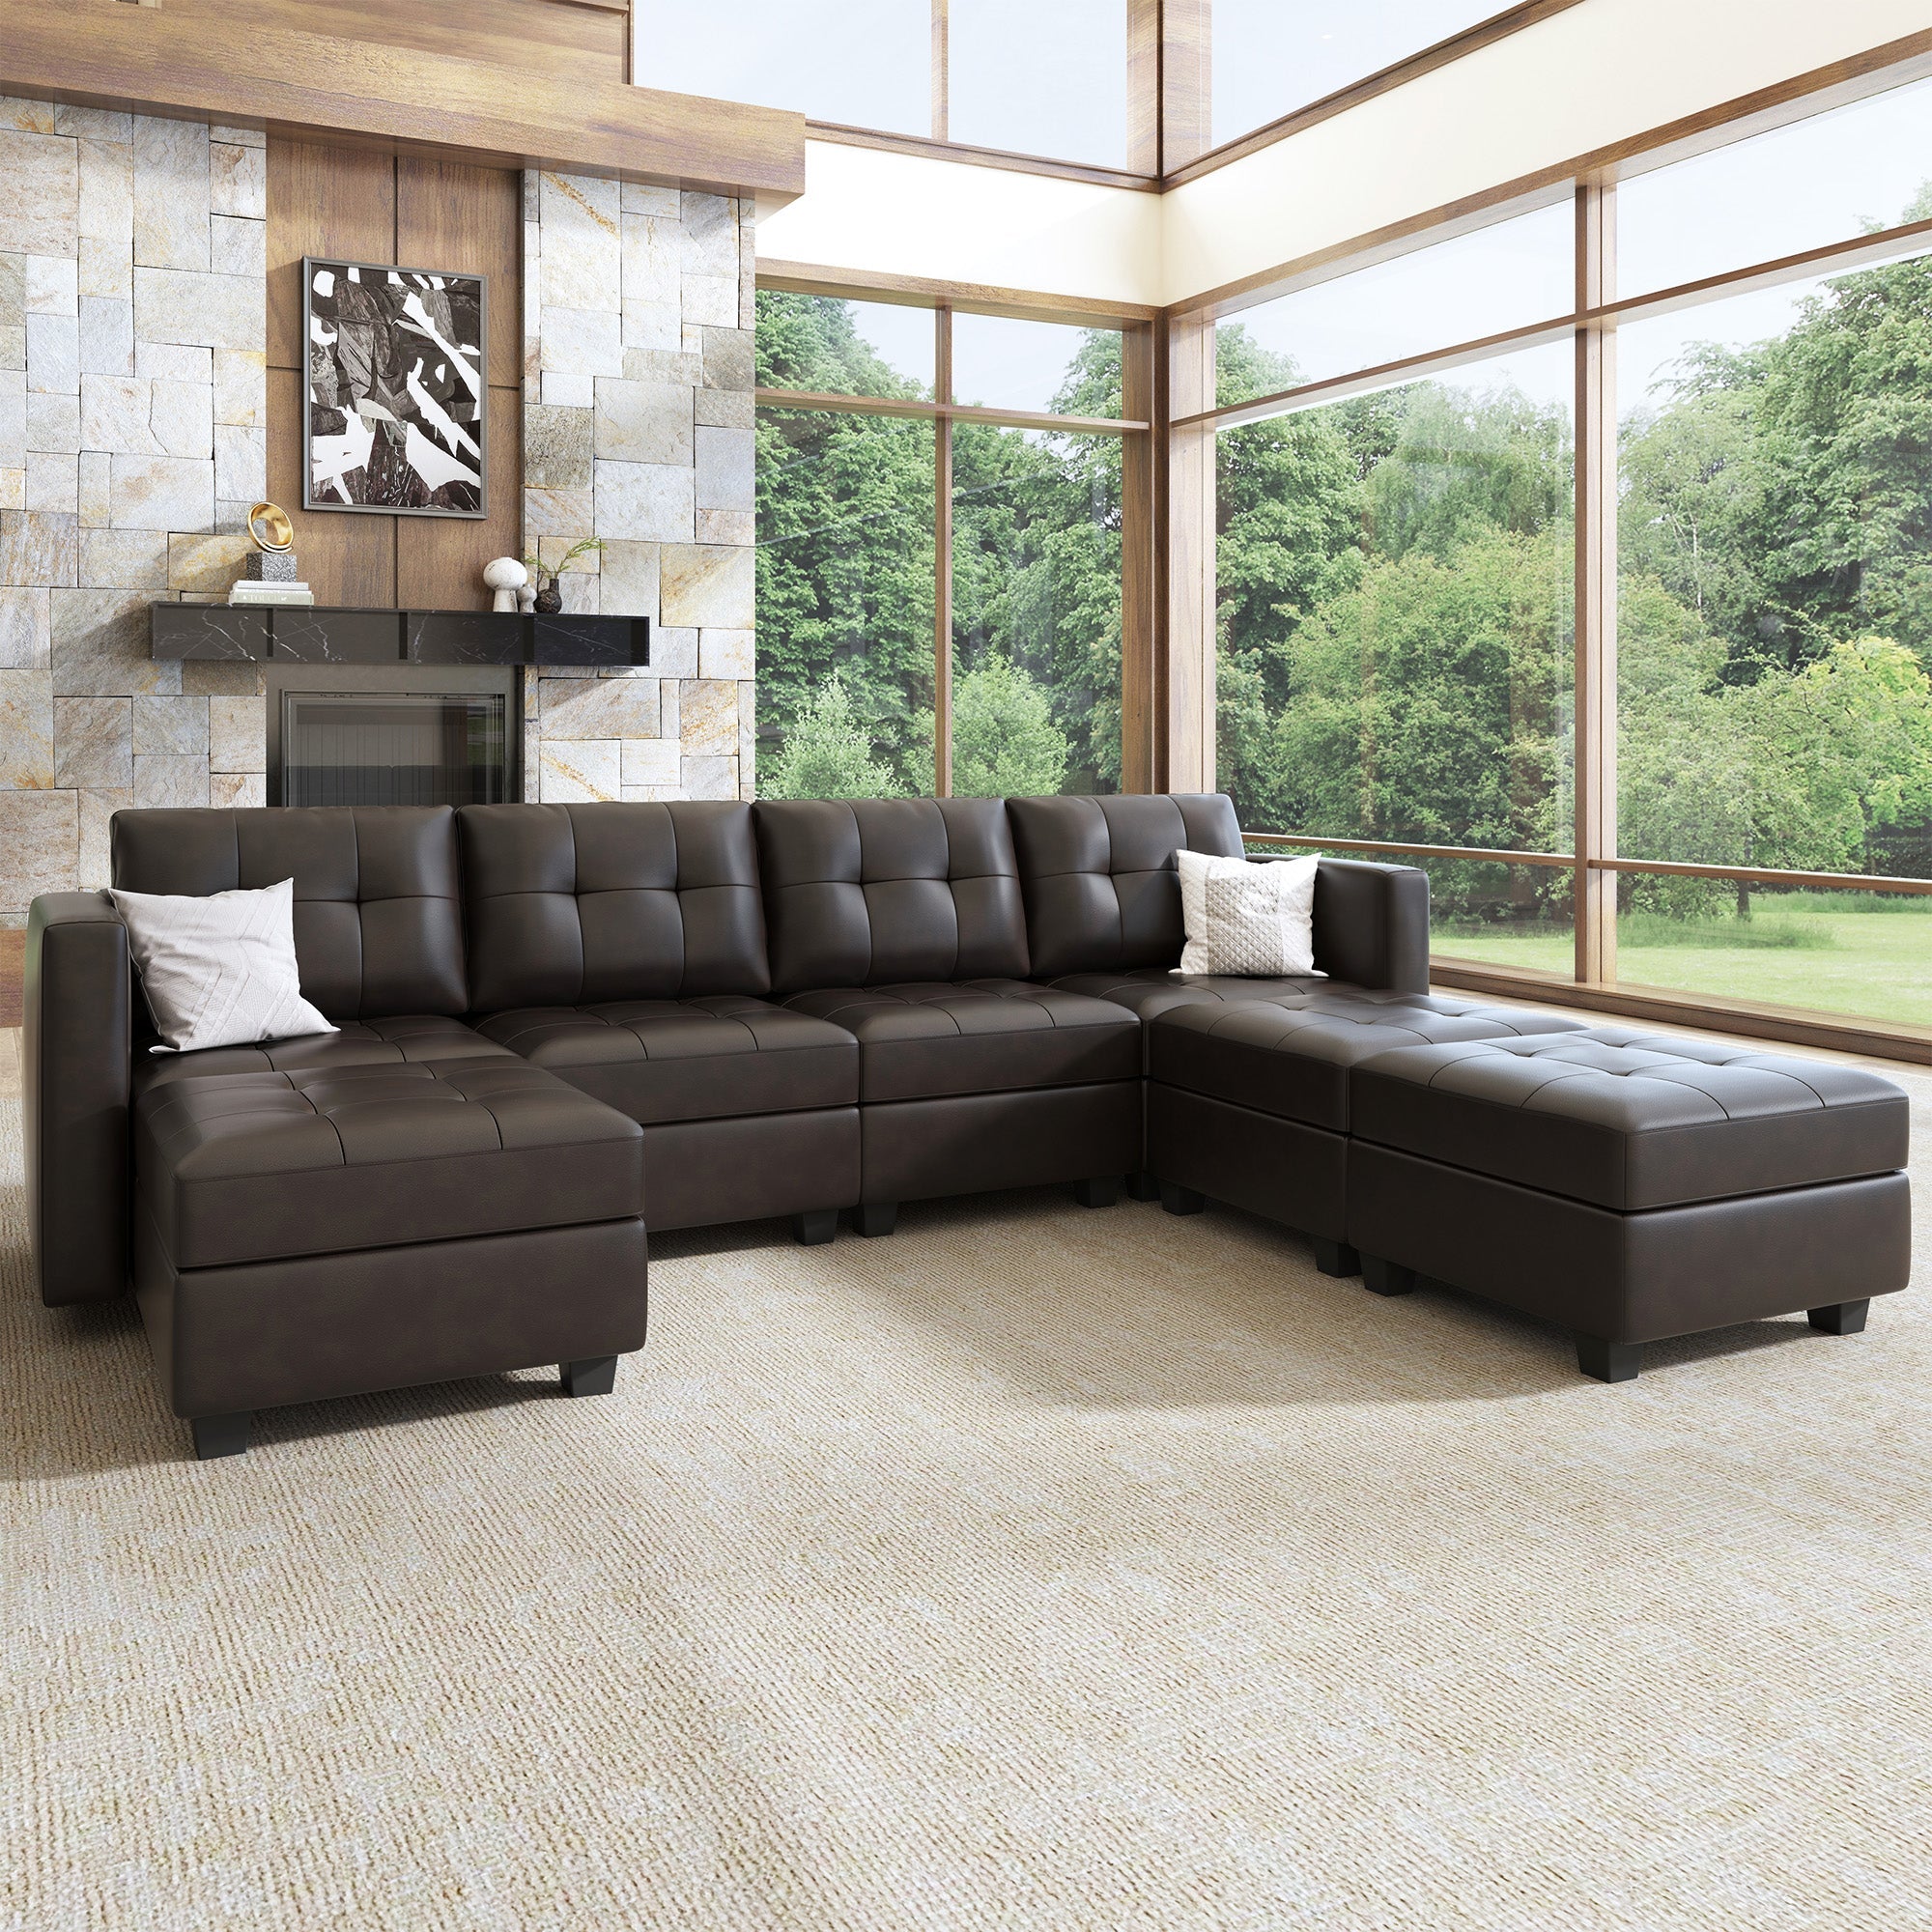 HONBAY 7-Piece Faux Leather Modular Sectional With Storage Seat